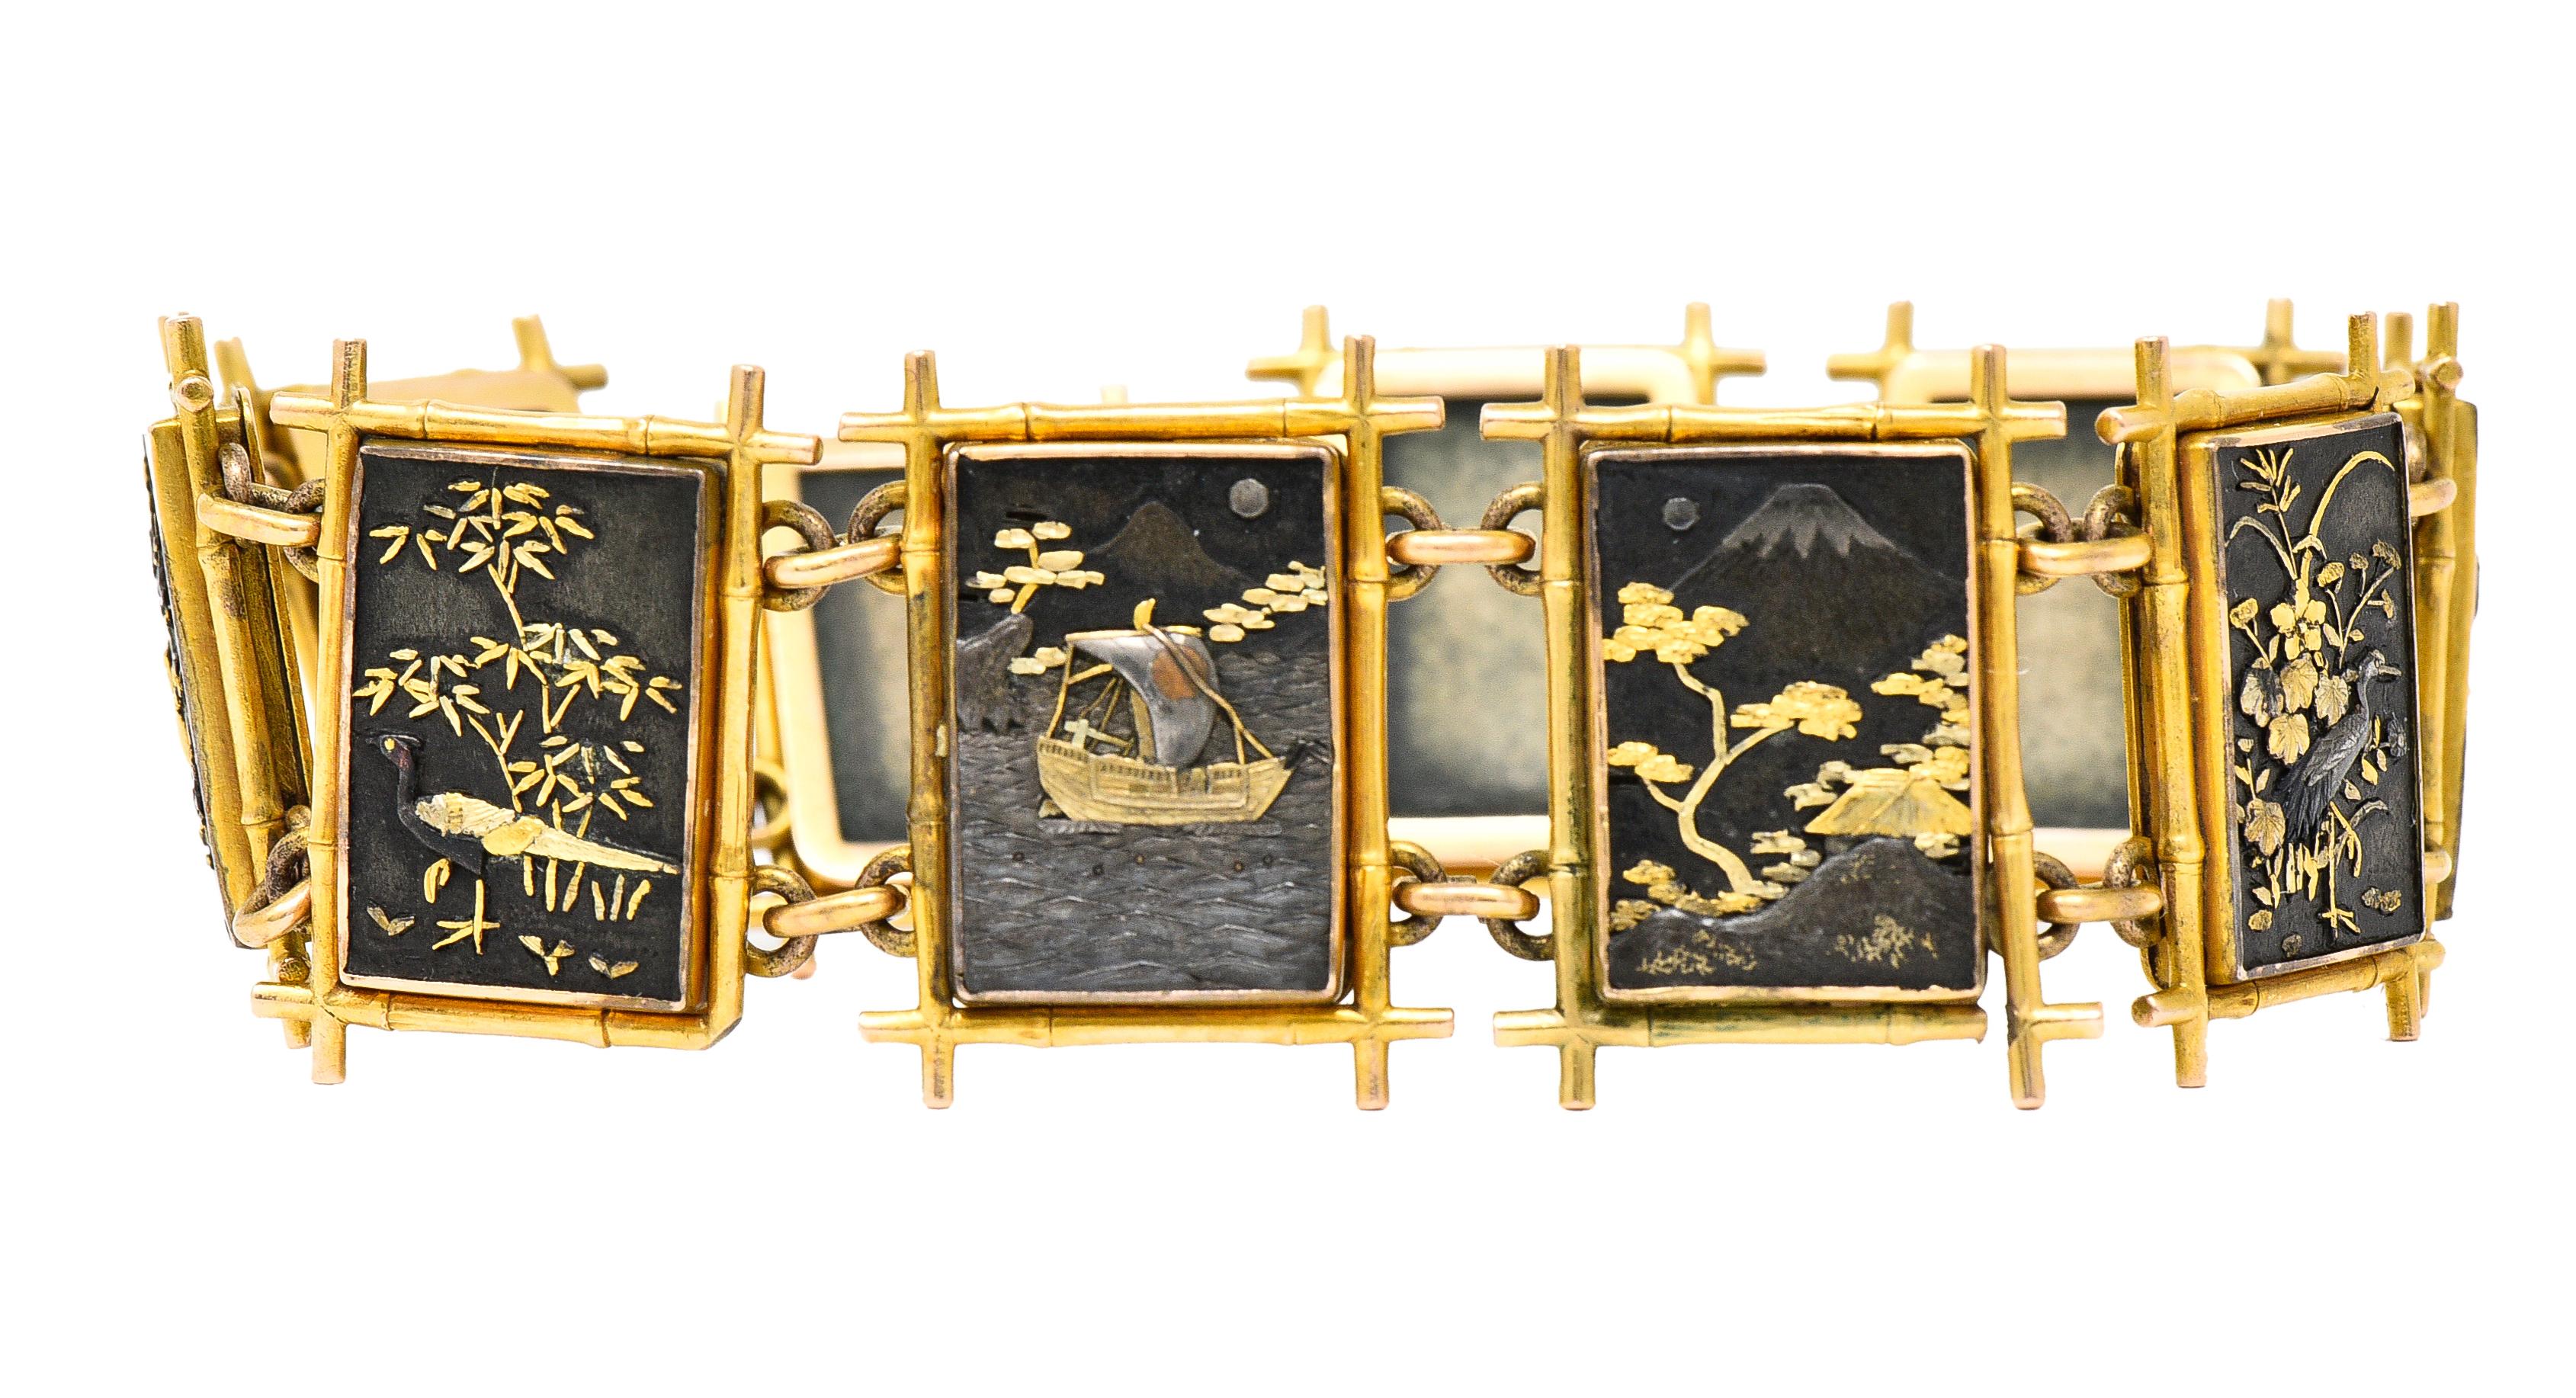 Designed as gold bamboo motif frame links each centering a shakudo panel. Depicting florals, birds, bamboo trees, a mountain and a ship at sea. Oxidized black silver with copper and gold accents. Connected via jump ring links. Completed by hidden